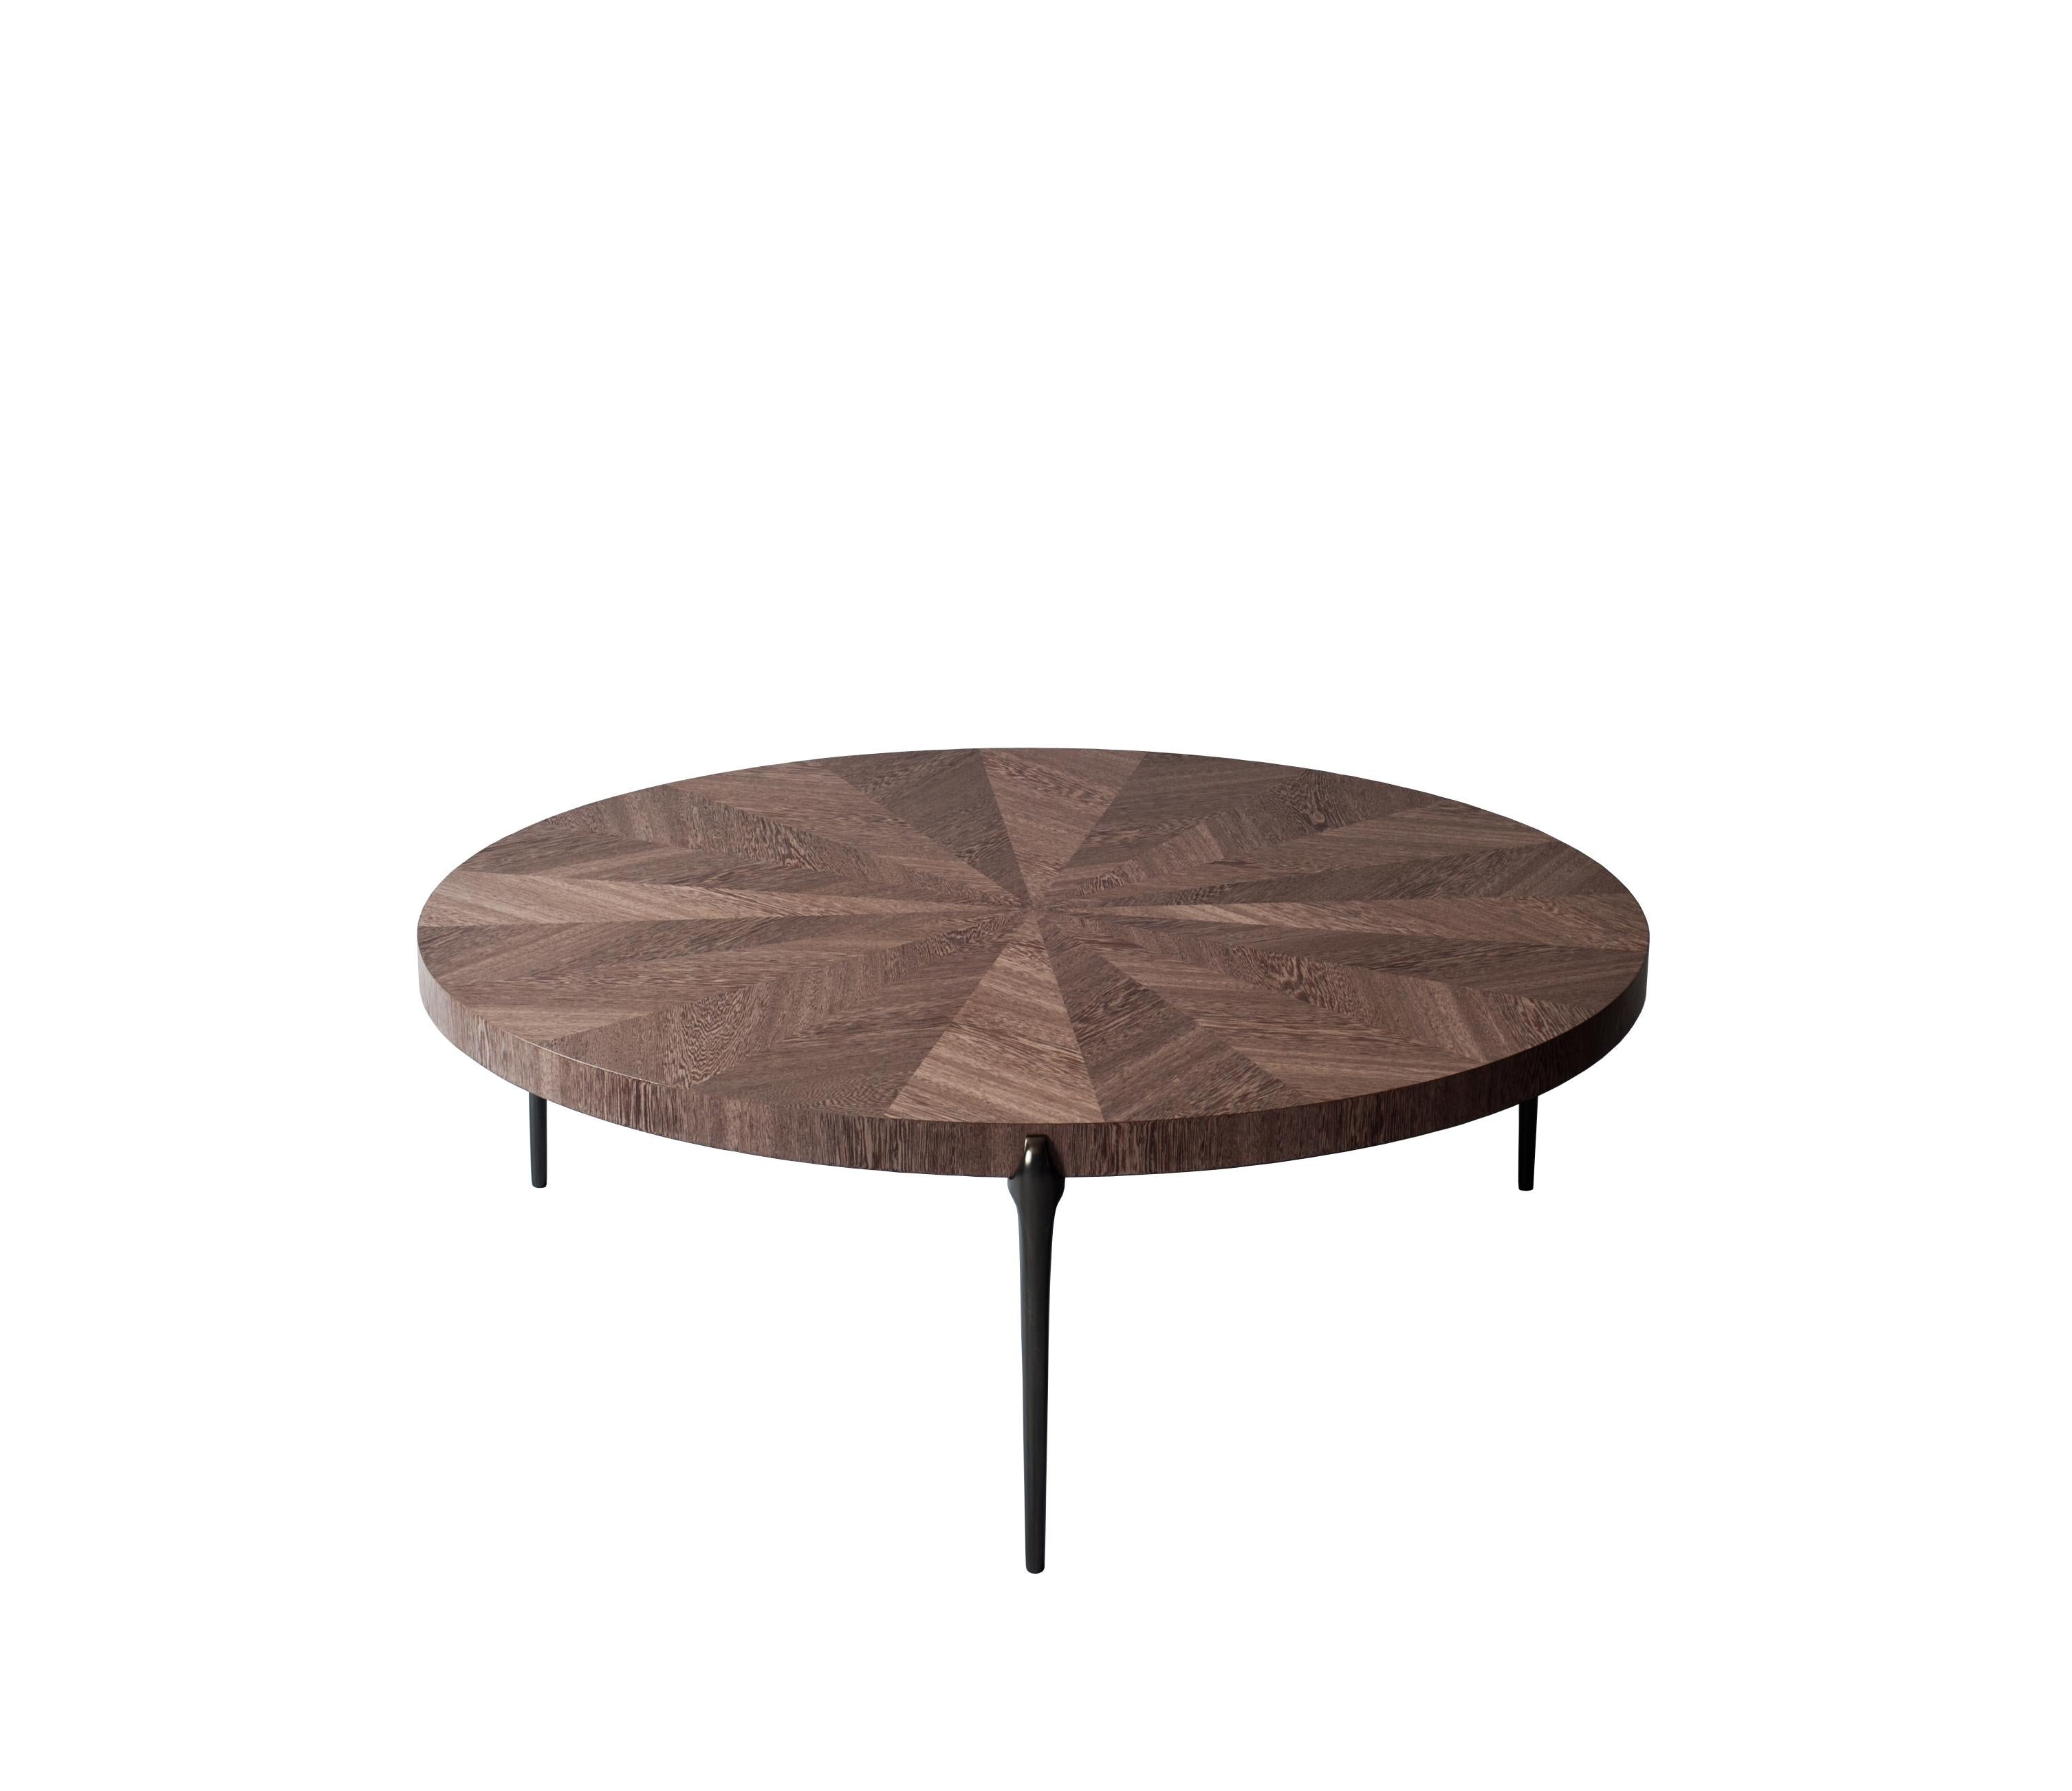 Acantha coffee table by DeMuro Das 
Dimensions: W 120 x D 120 x H 41.1 cm
Materials: Matte Sucupira (Dyed) Tabletop
 Solid Bronze (Grey) - Satin legs

Dimensions and finishes can be customized

DeMuro Das is an international design firm and